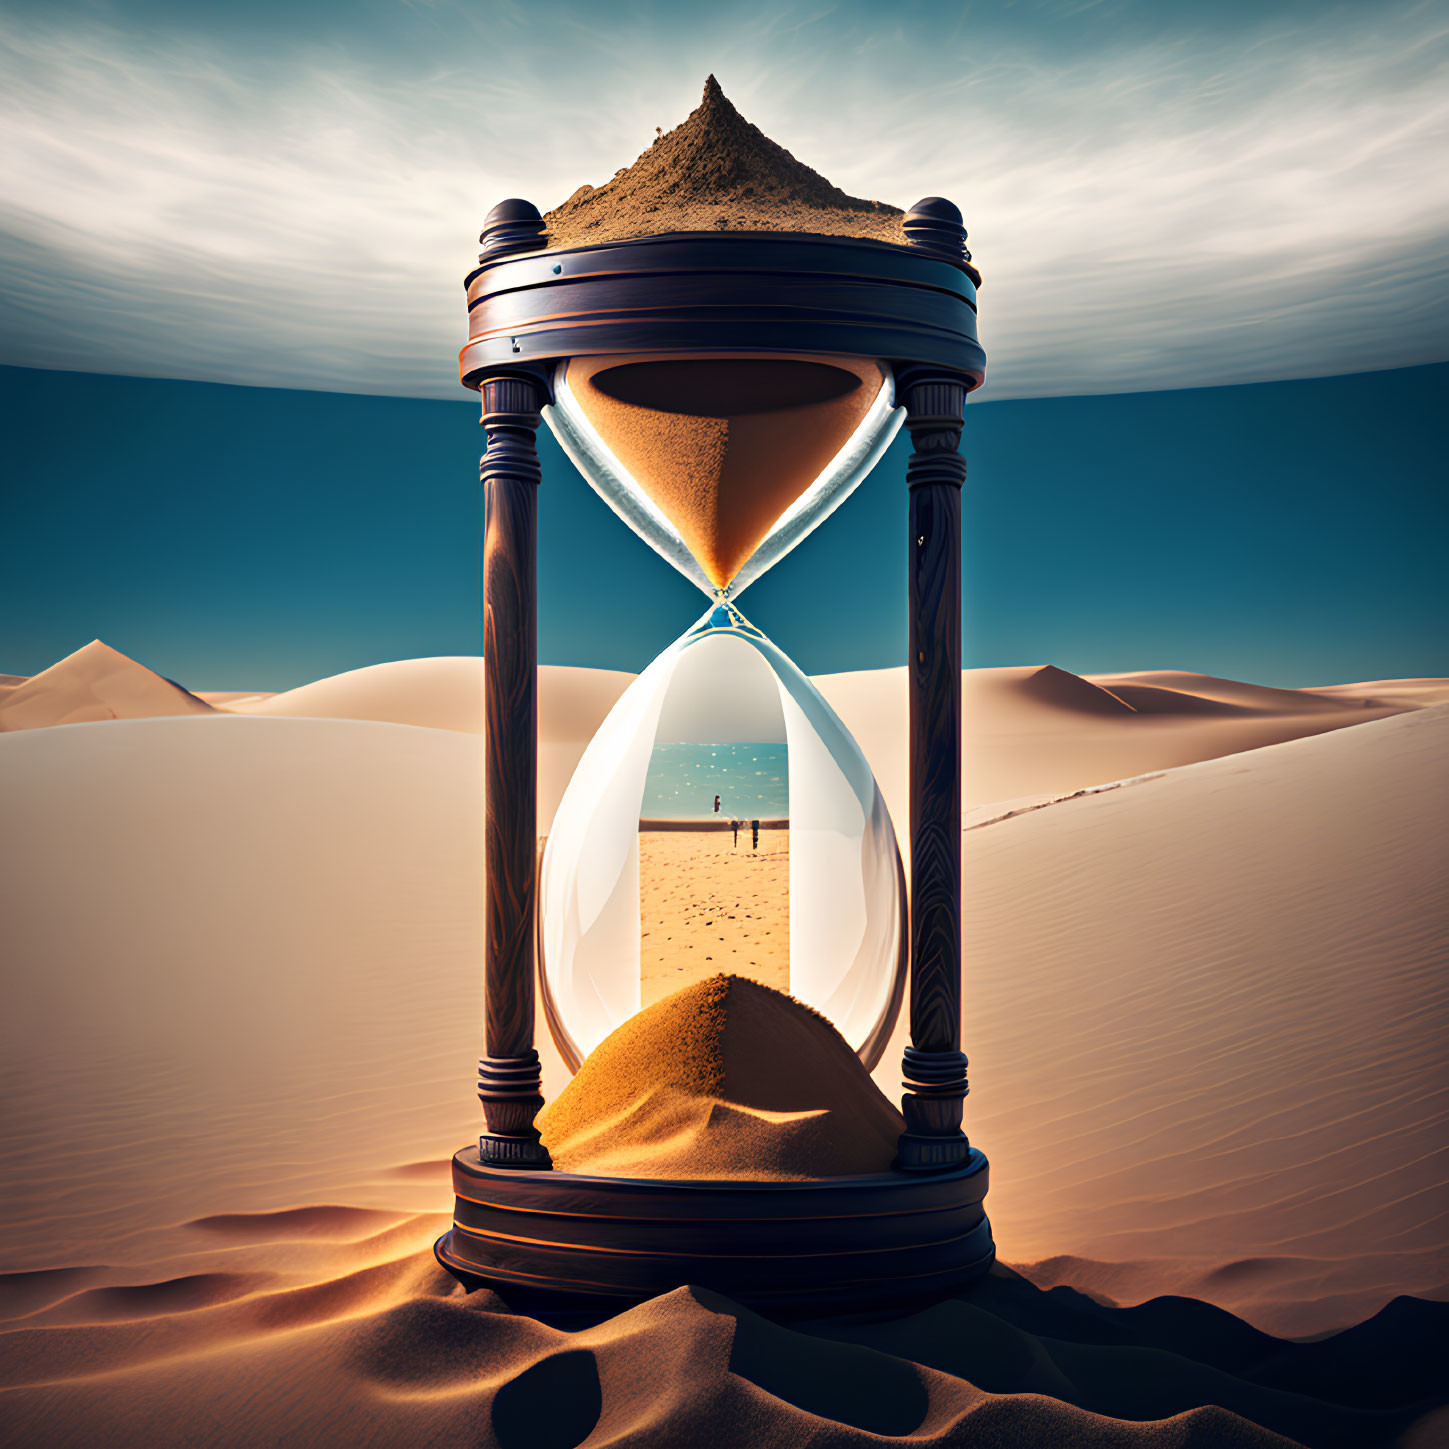 Hourglass in Desert: Sand Flows, Reality Meets Surreal Beach Scene